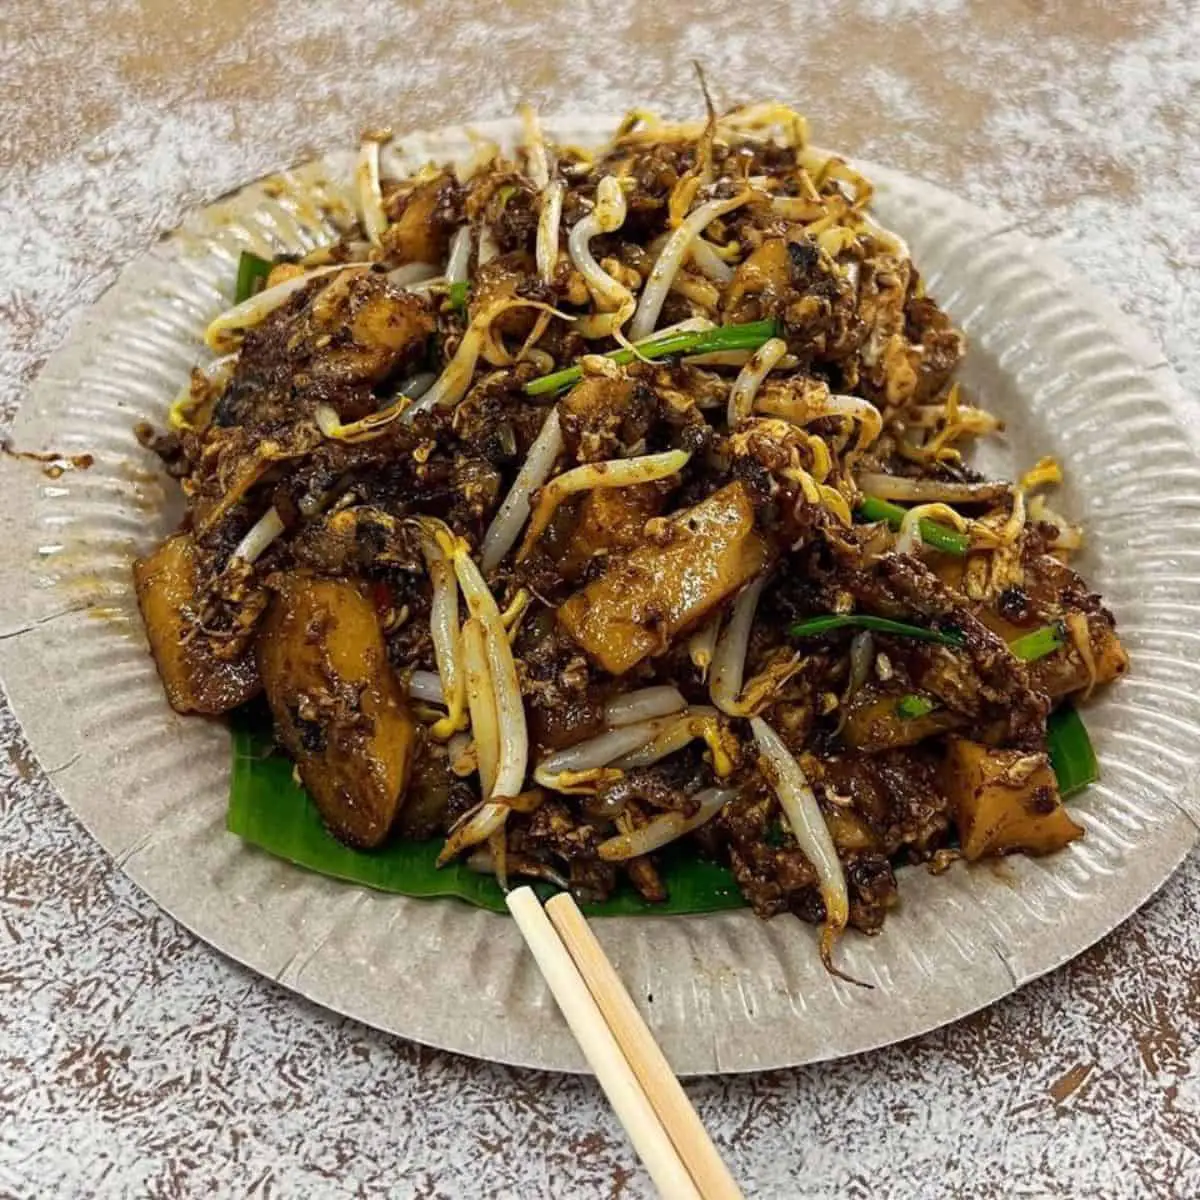 Sumptuous Penang street food in a paper plate and banana leaf underneath